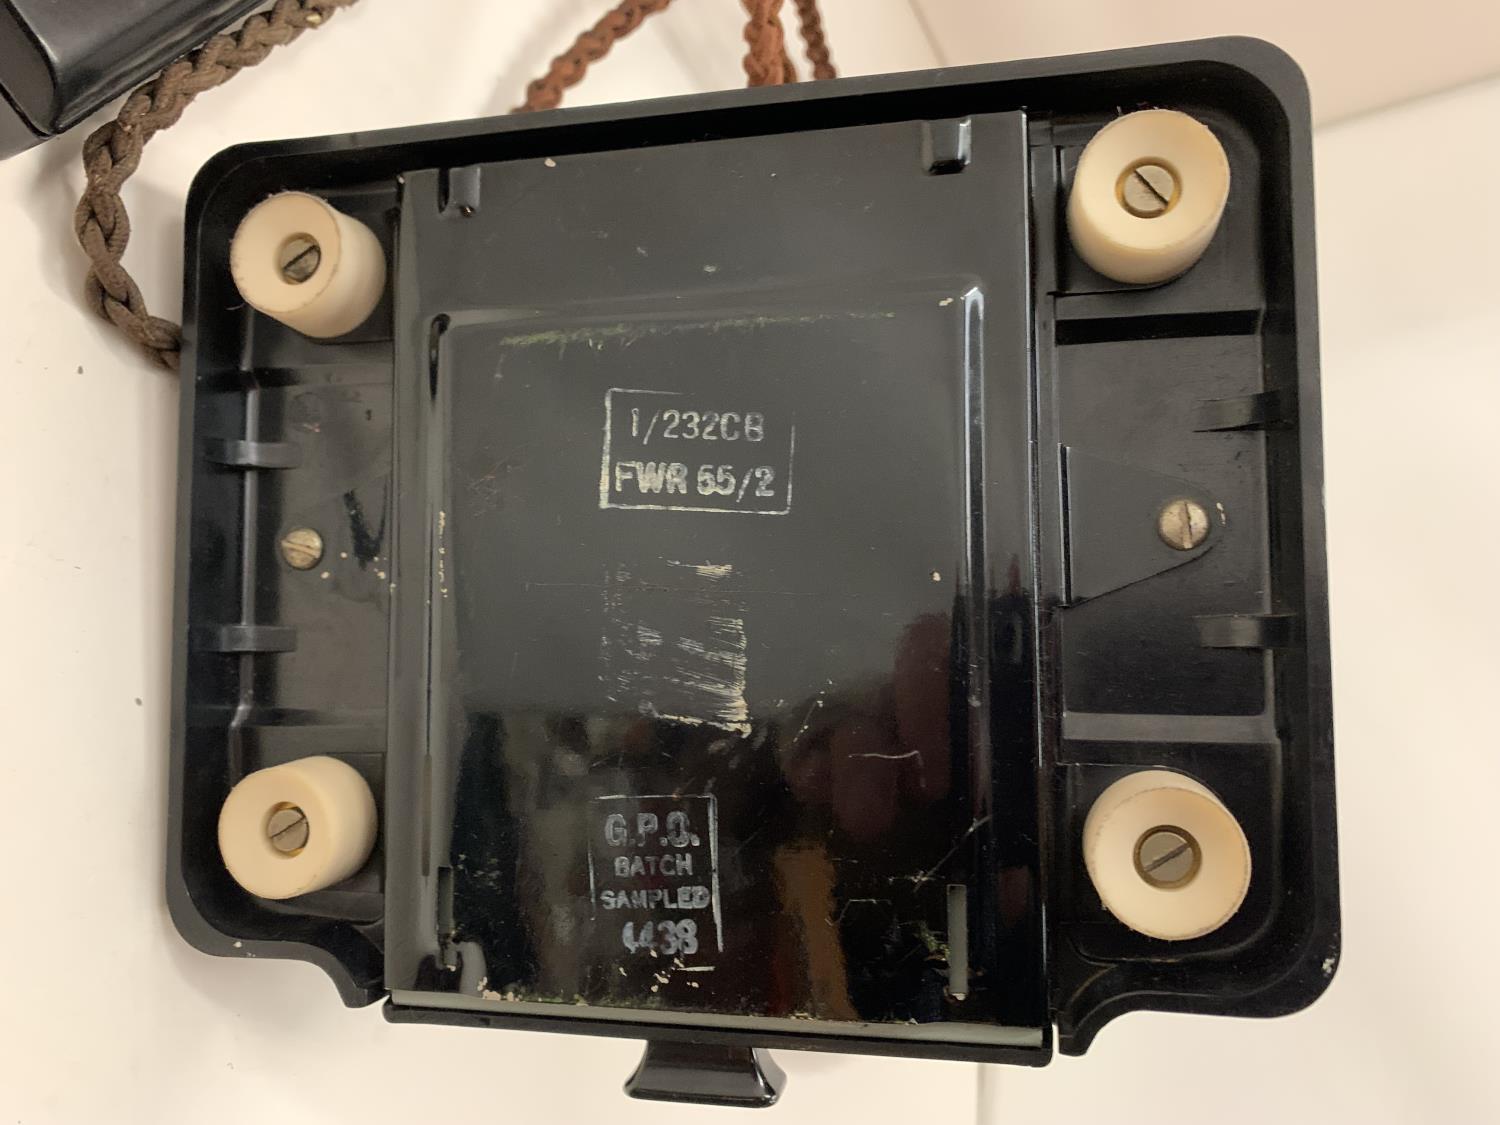 A VINTAGE BLACK BAKELITE TELEPHONE WITH PULL OUT NUMBER TRAY WIRED FOR MODERN USE BUT NO WARRANTY - Image 5 of 5